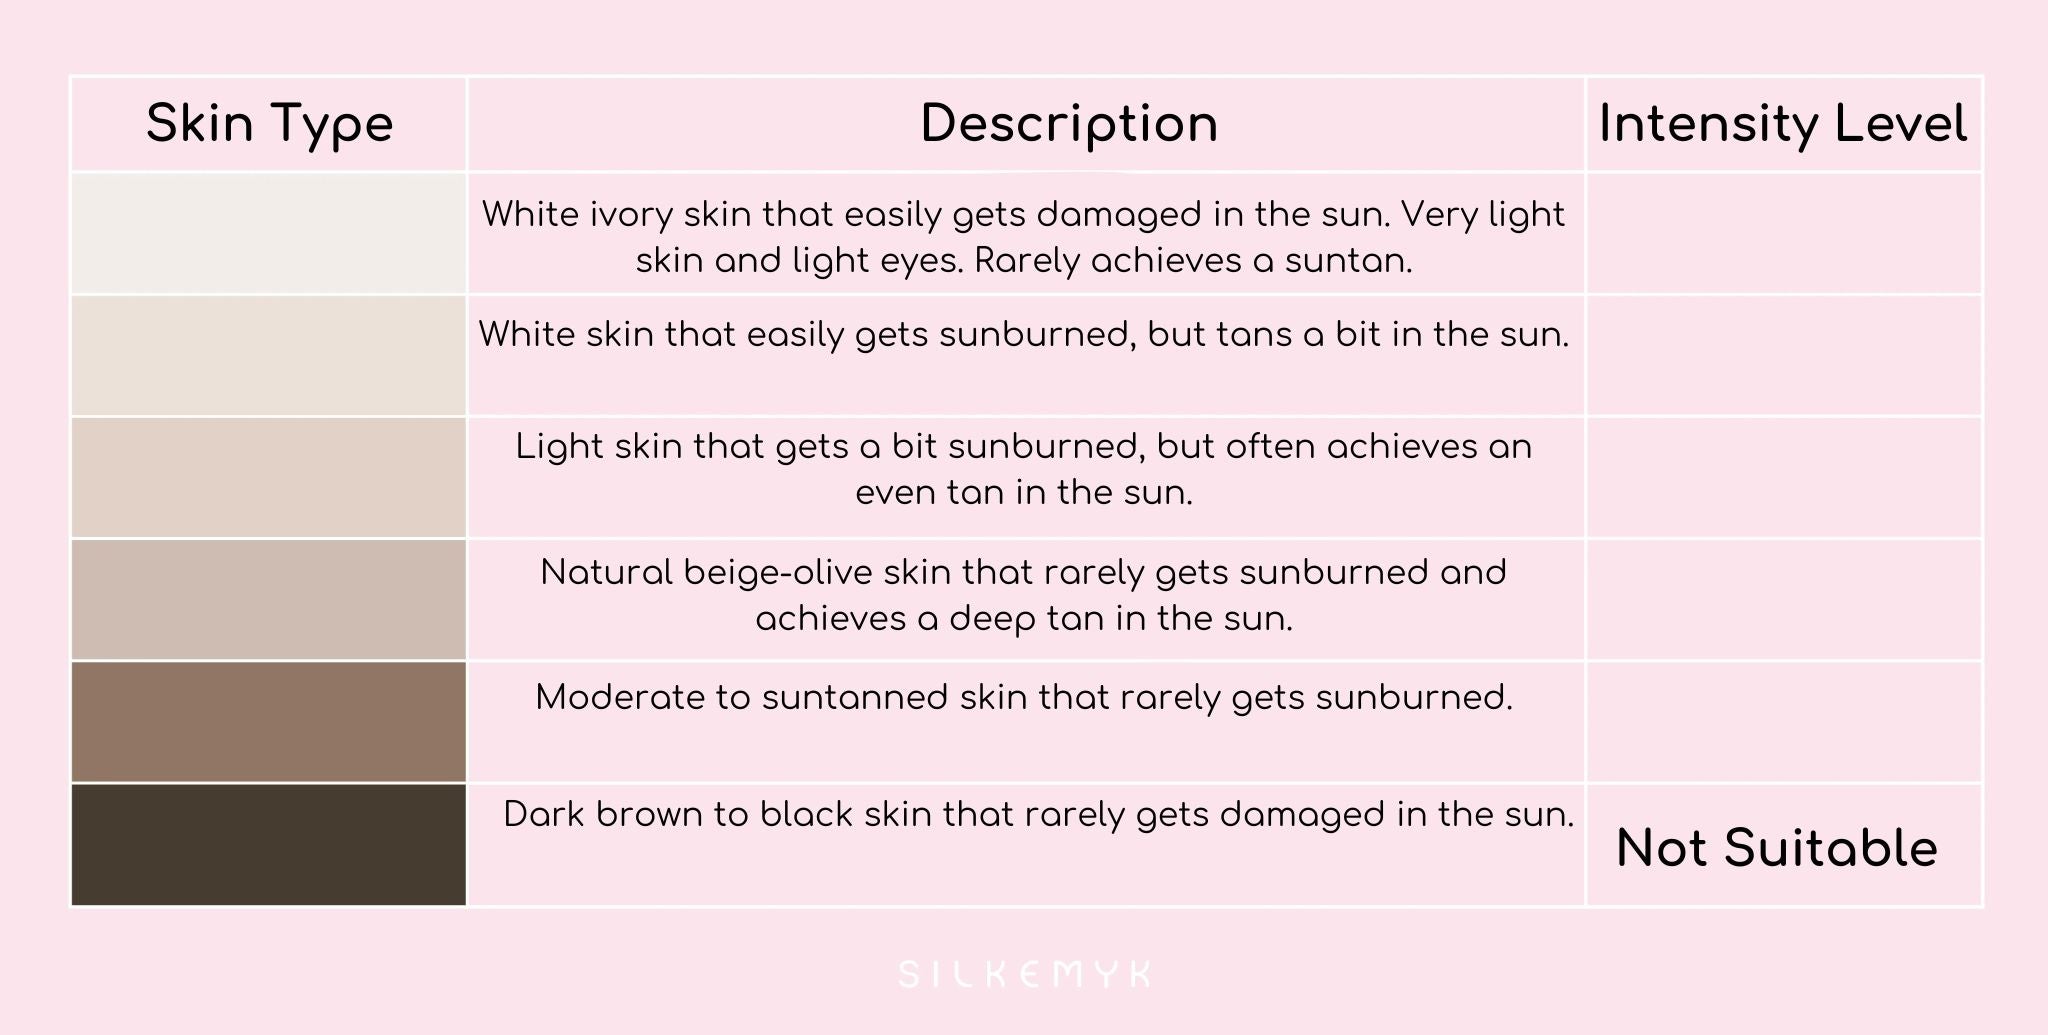 Guide to skin types and sun reactions, from white ivory skin to dark brown and black skin, showing varying susceptibility to sunburn and tanning levels.